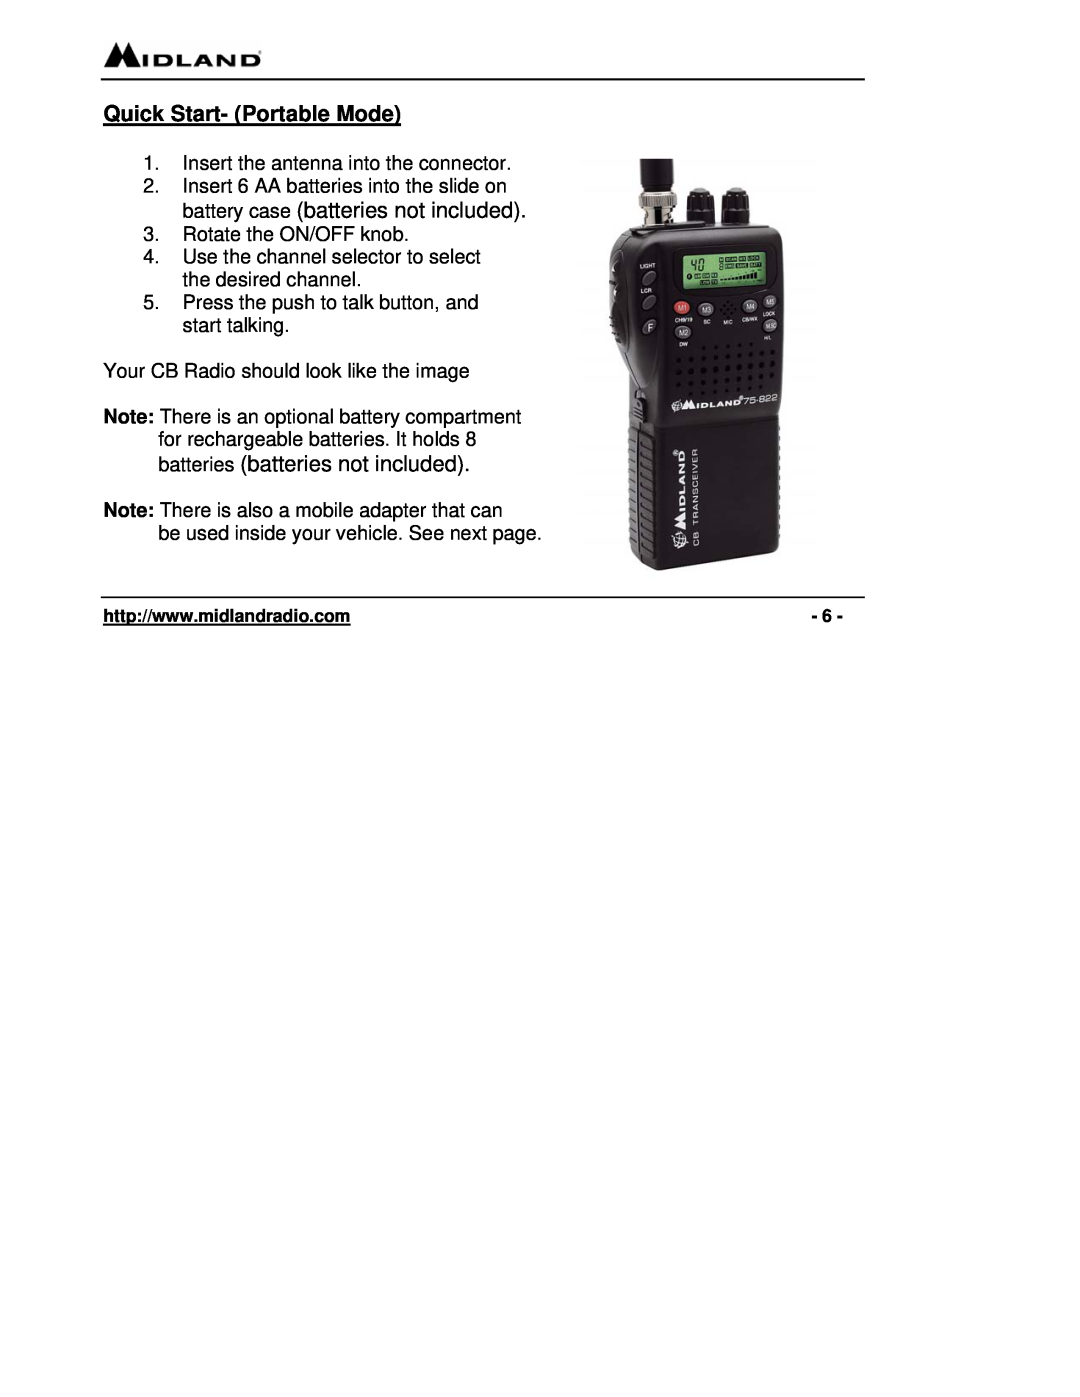 Midland Radio 75-822 owner manual Quick Start- Portable Mode, batteries batteries not included 